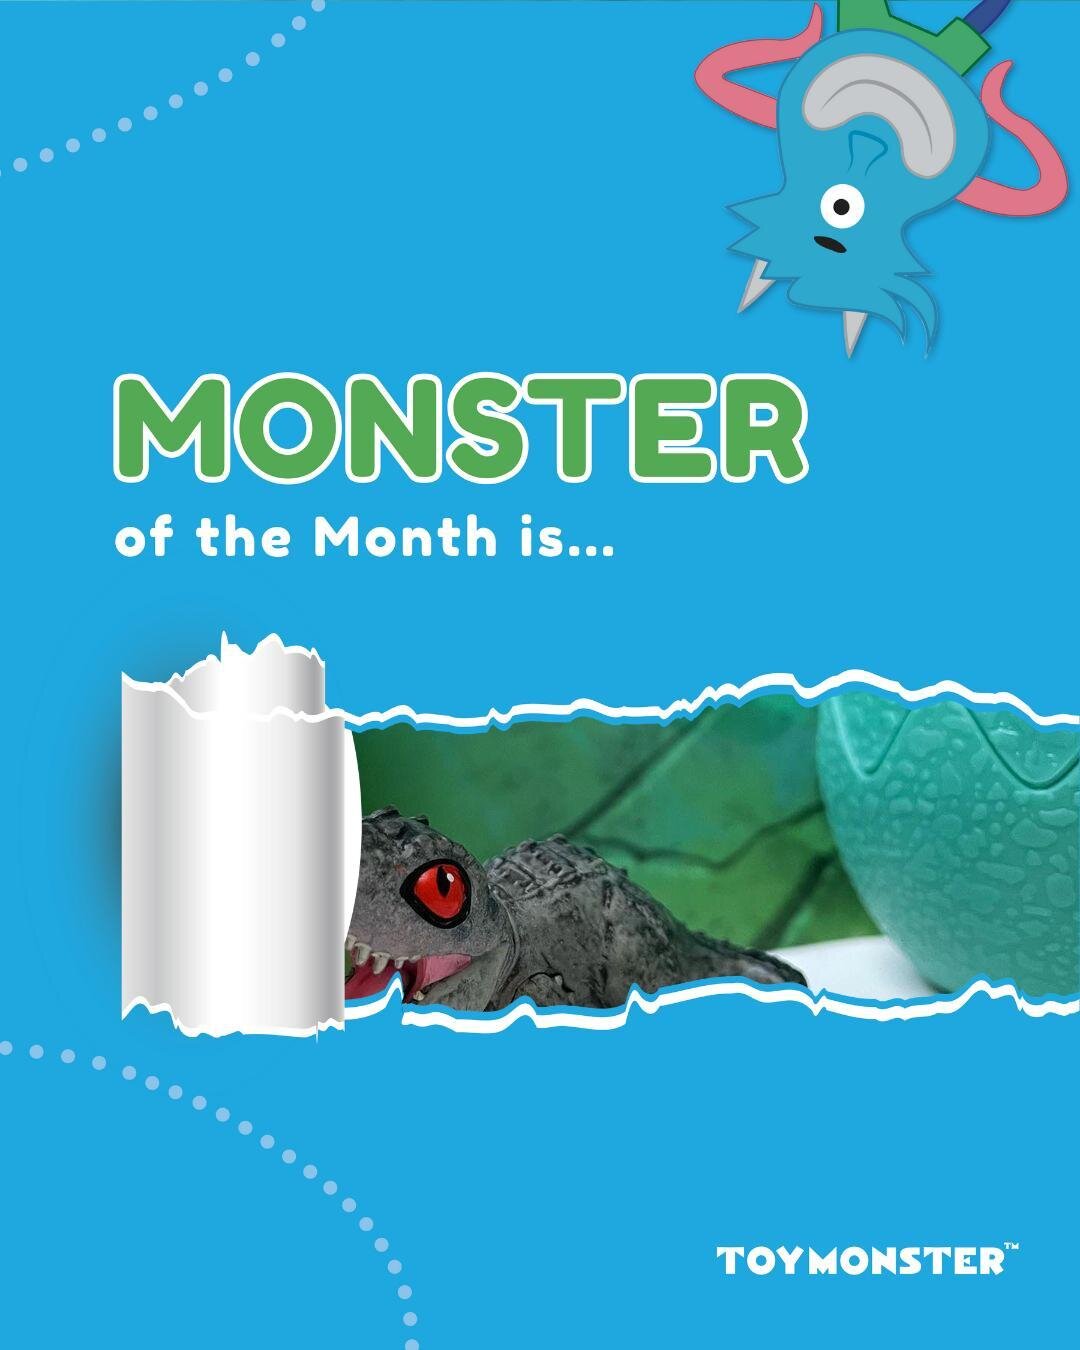 May is here, which means we have a new Monster of the Month! Swipe to find out 👉⁠
⁠
May's monster of the month is...... @jpsaurus 👑⁠
⁠
Tag us in your posts to have the opportunity to be highlighted as our next Monster of the Month! 👹⁠
⁠
📸 @jpsaur